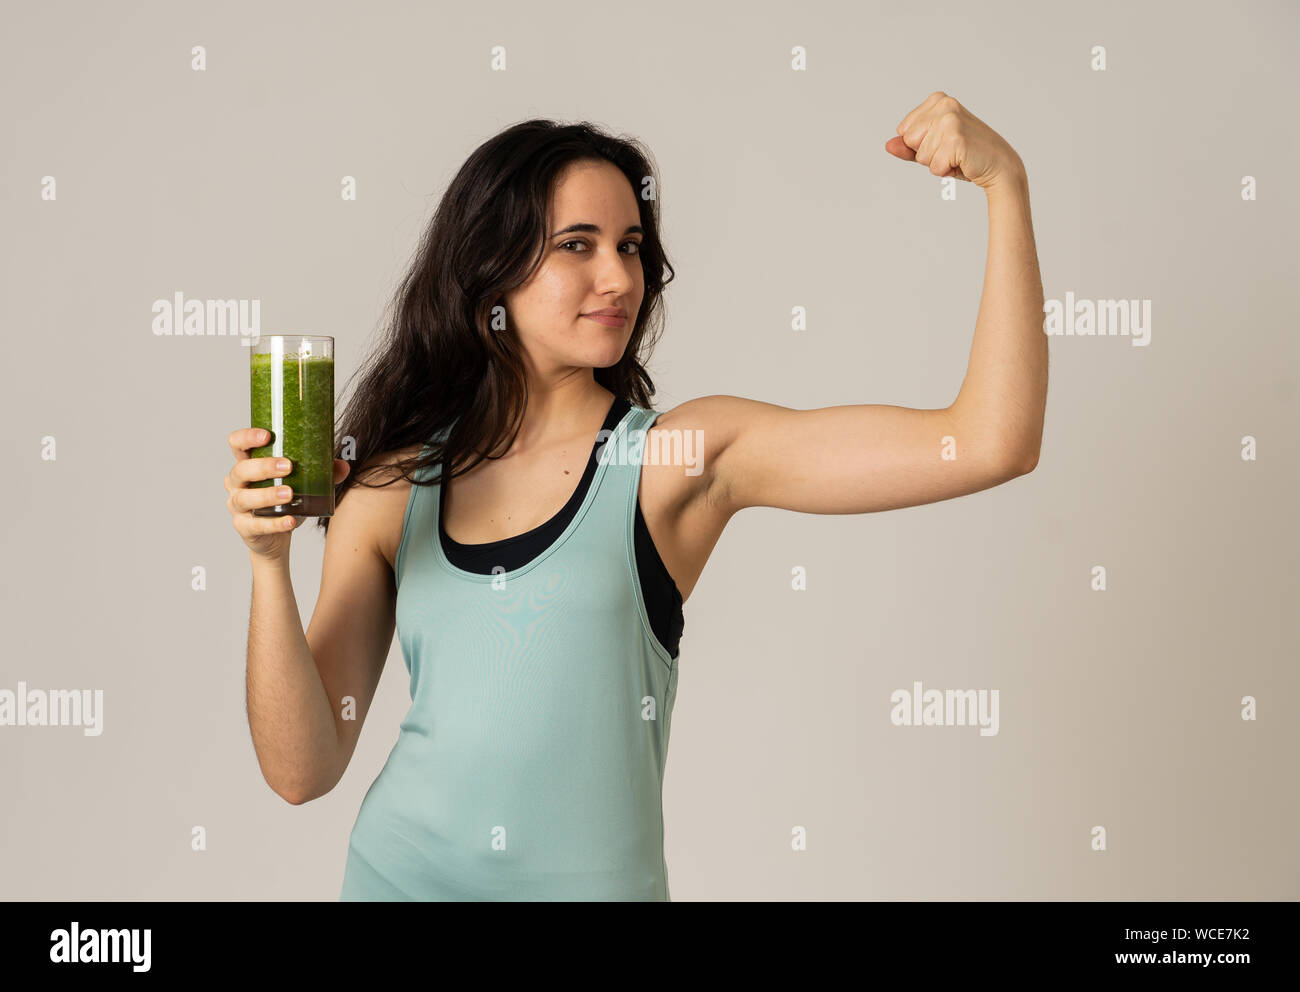 Fitness woman happy smiling holding glass of green vegetable smoothie posing happy and cute after training exercise felling fit and strong. In Body ca Stock Photo